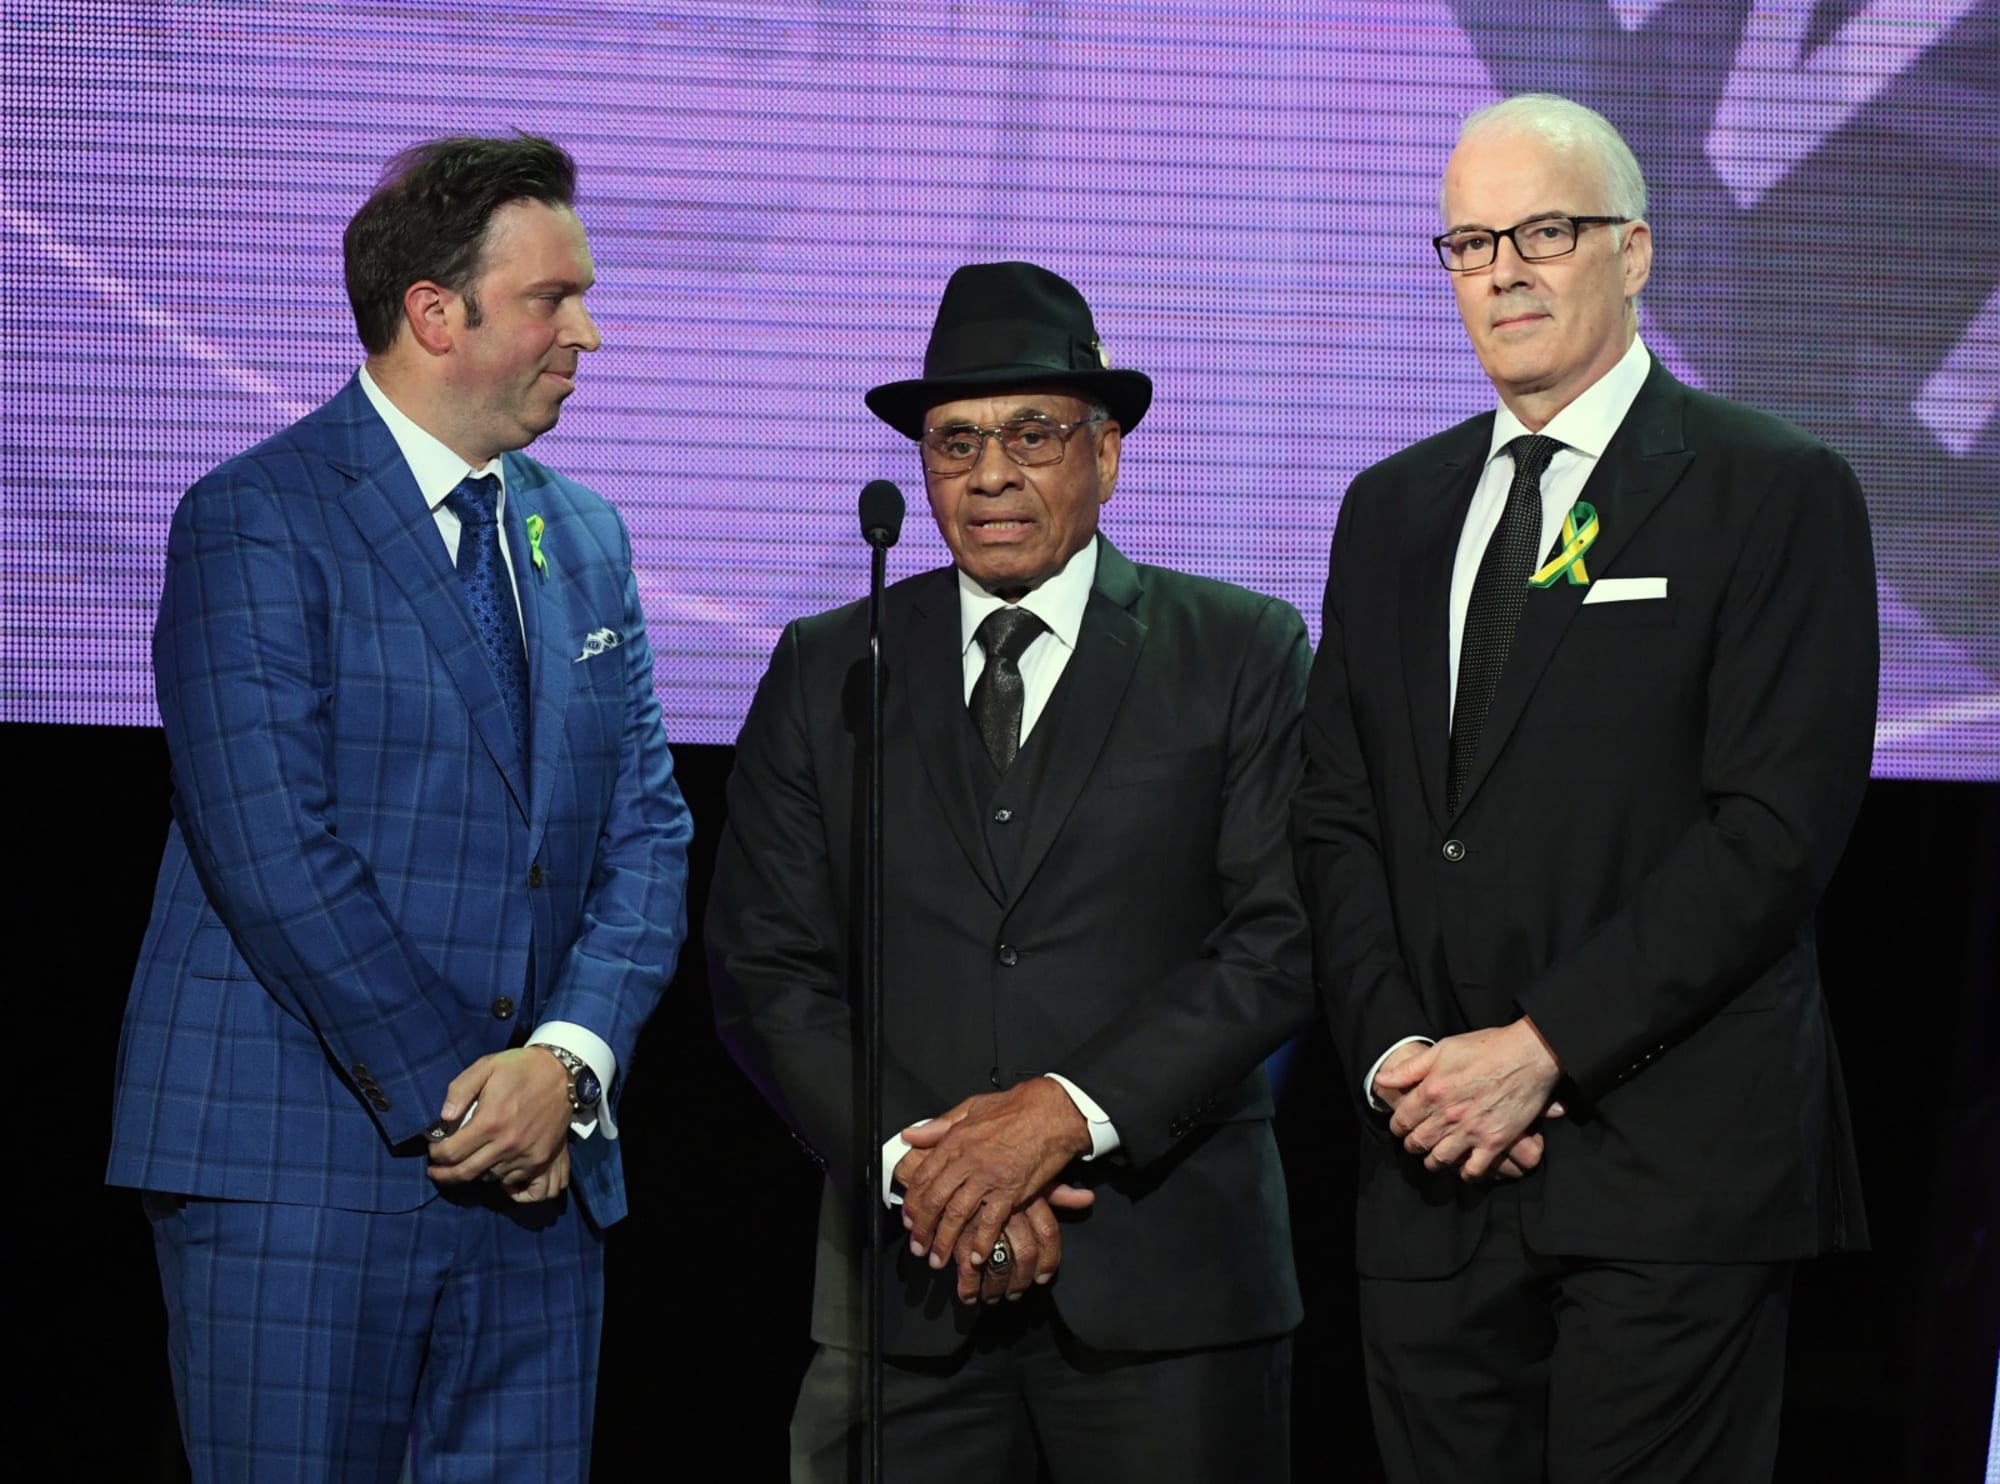 Willie O'Ree: From NHL pioneer to the Hockey Hall of Fame